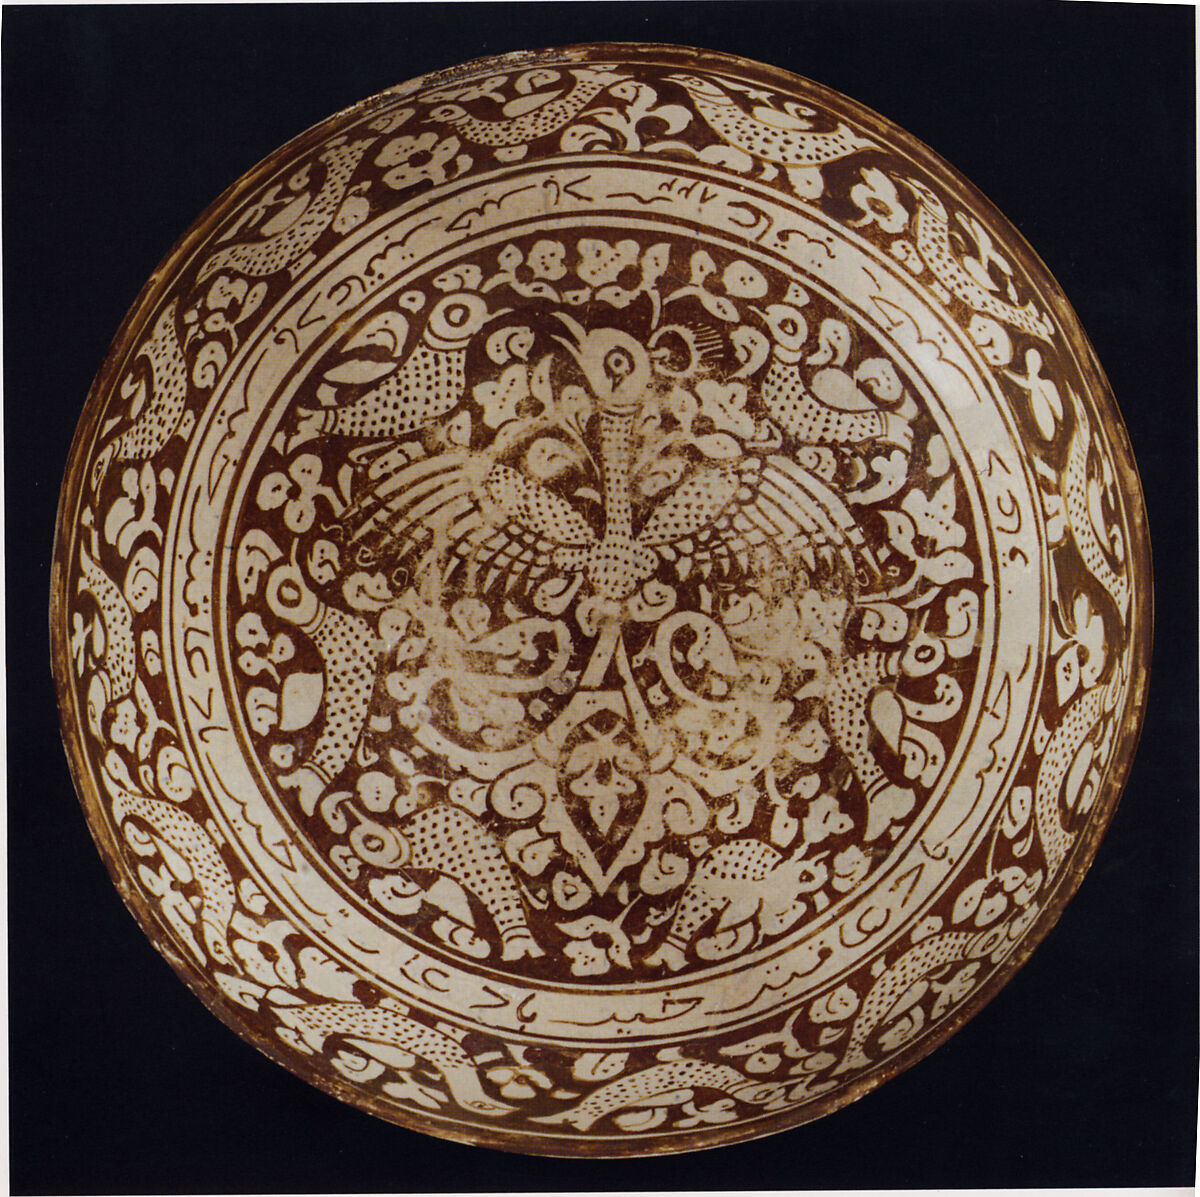 Bowl with Repeating Persian Inscription Wishing for Good Fortune, Stonepaste; luster-painted on opaque white glaze 